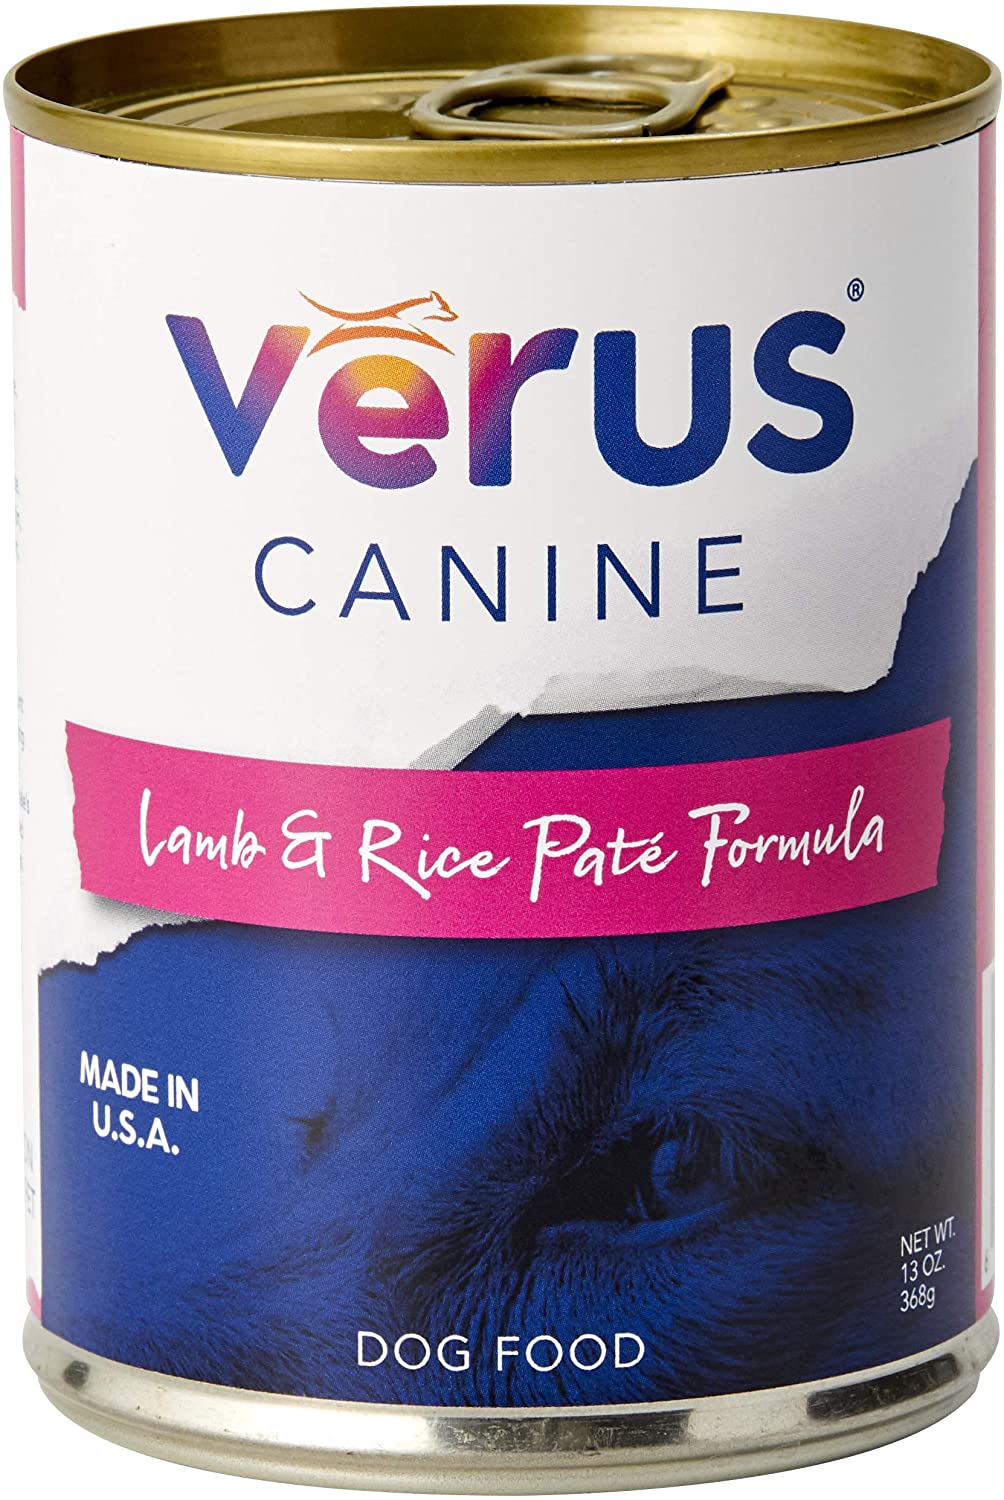 Verus Lamb & Rice Canned Dog Food - 13 oz Cans - Case of 12  